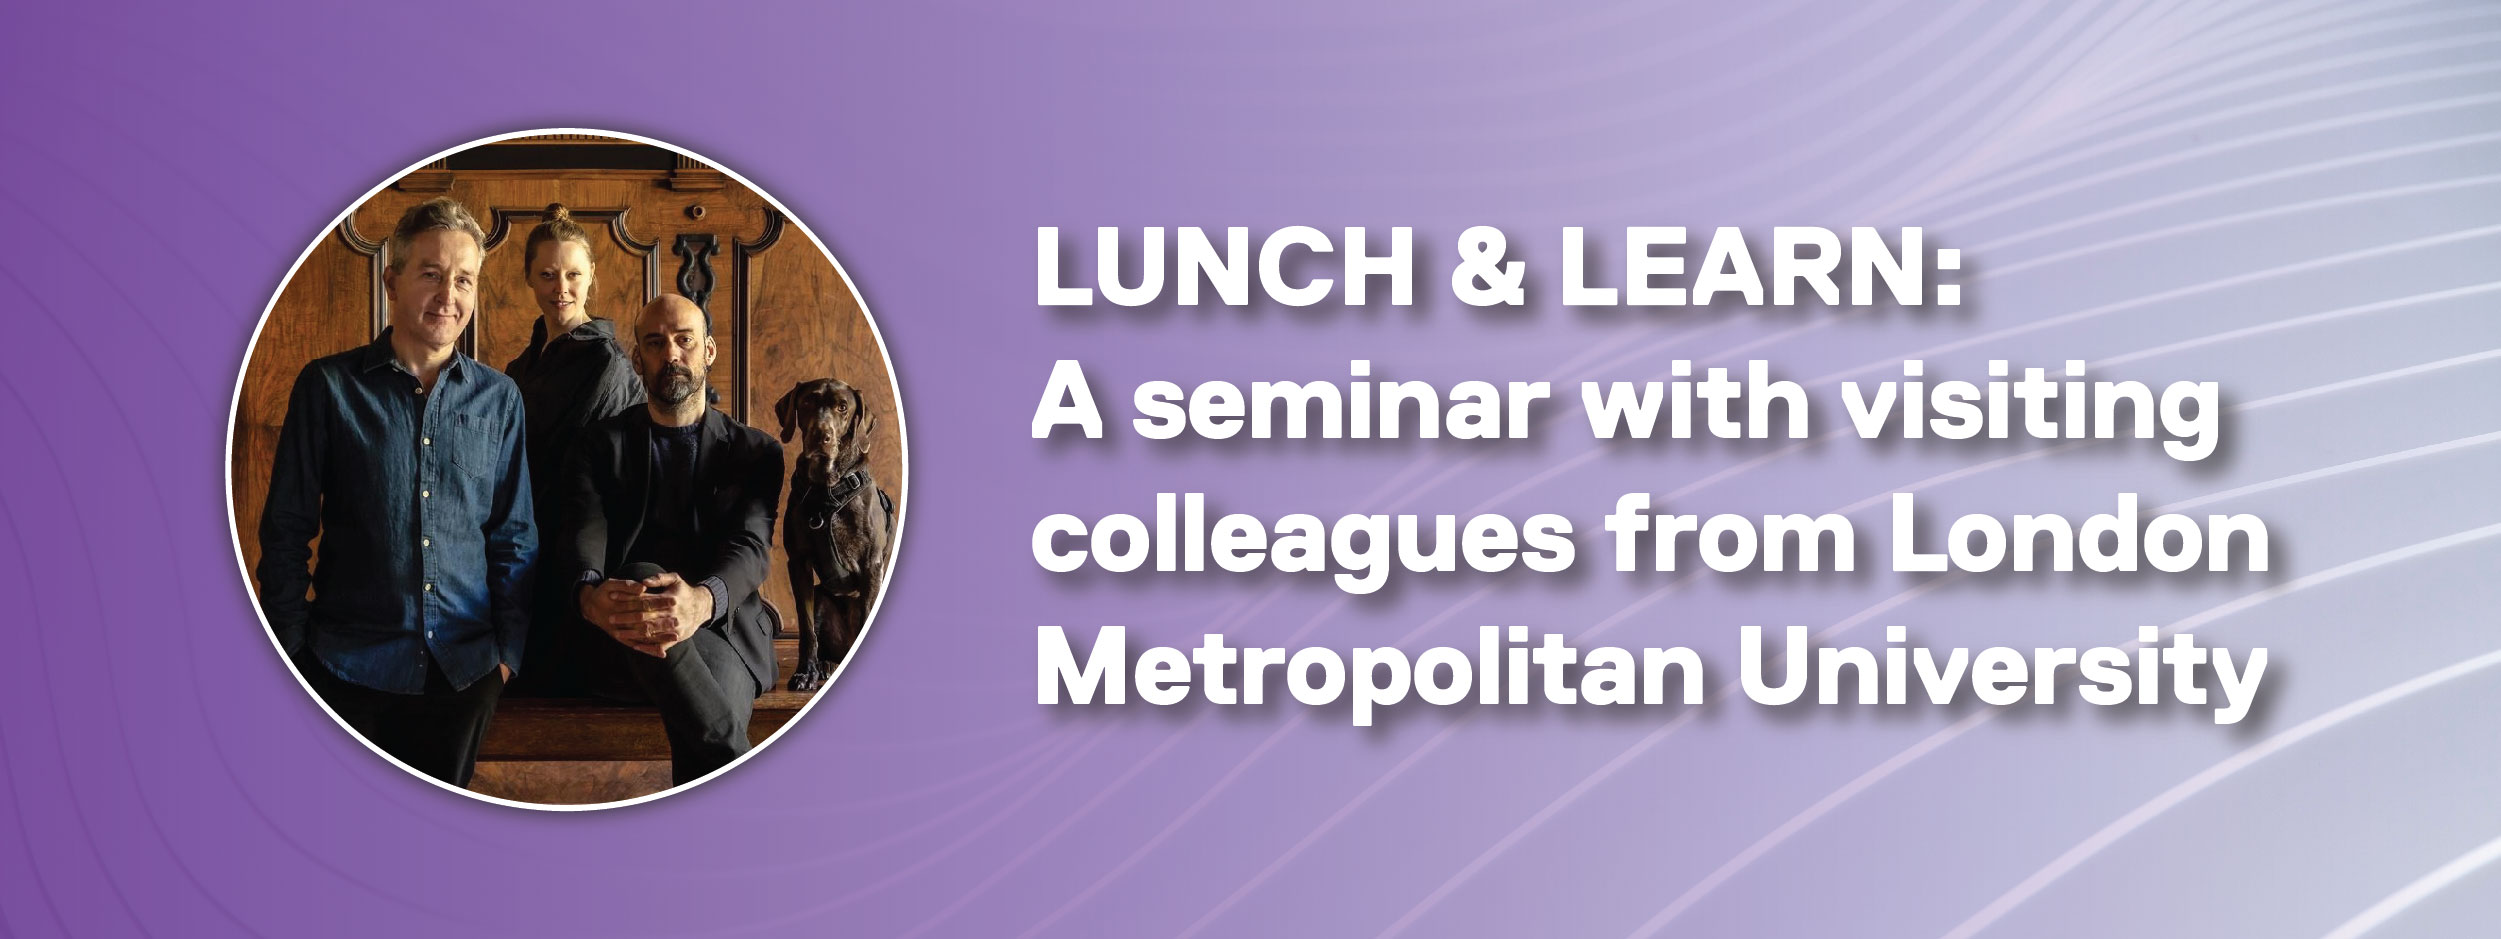 Roehampton event titled "Lunch & Learn: Integration through racism?"